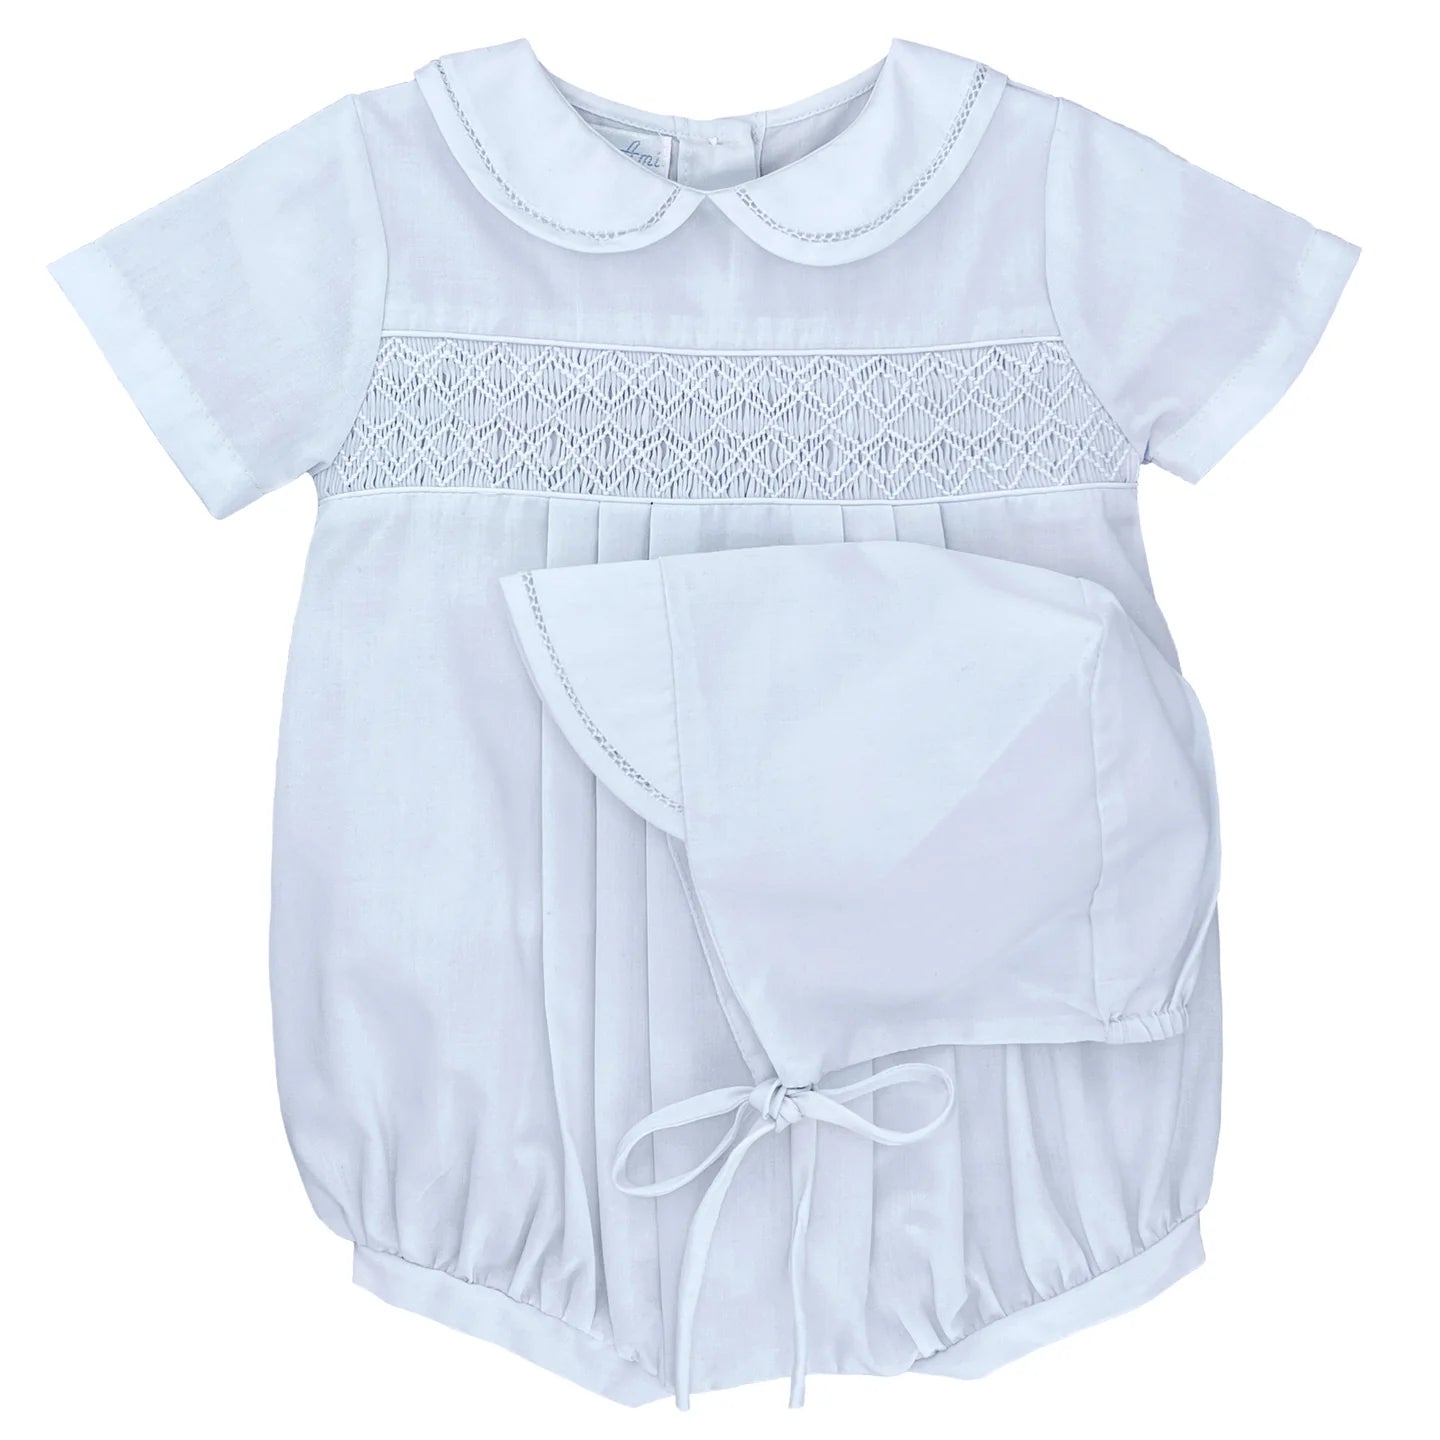 Boys Blue Romper with Smocking and Hat